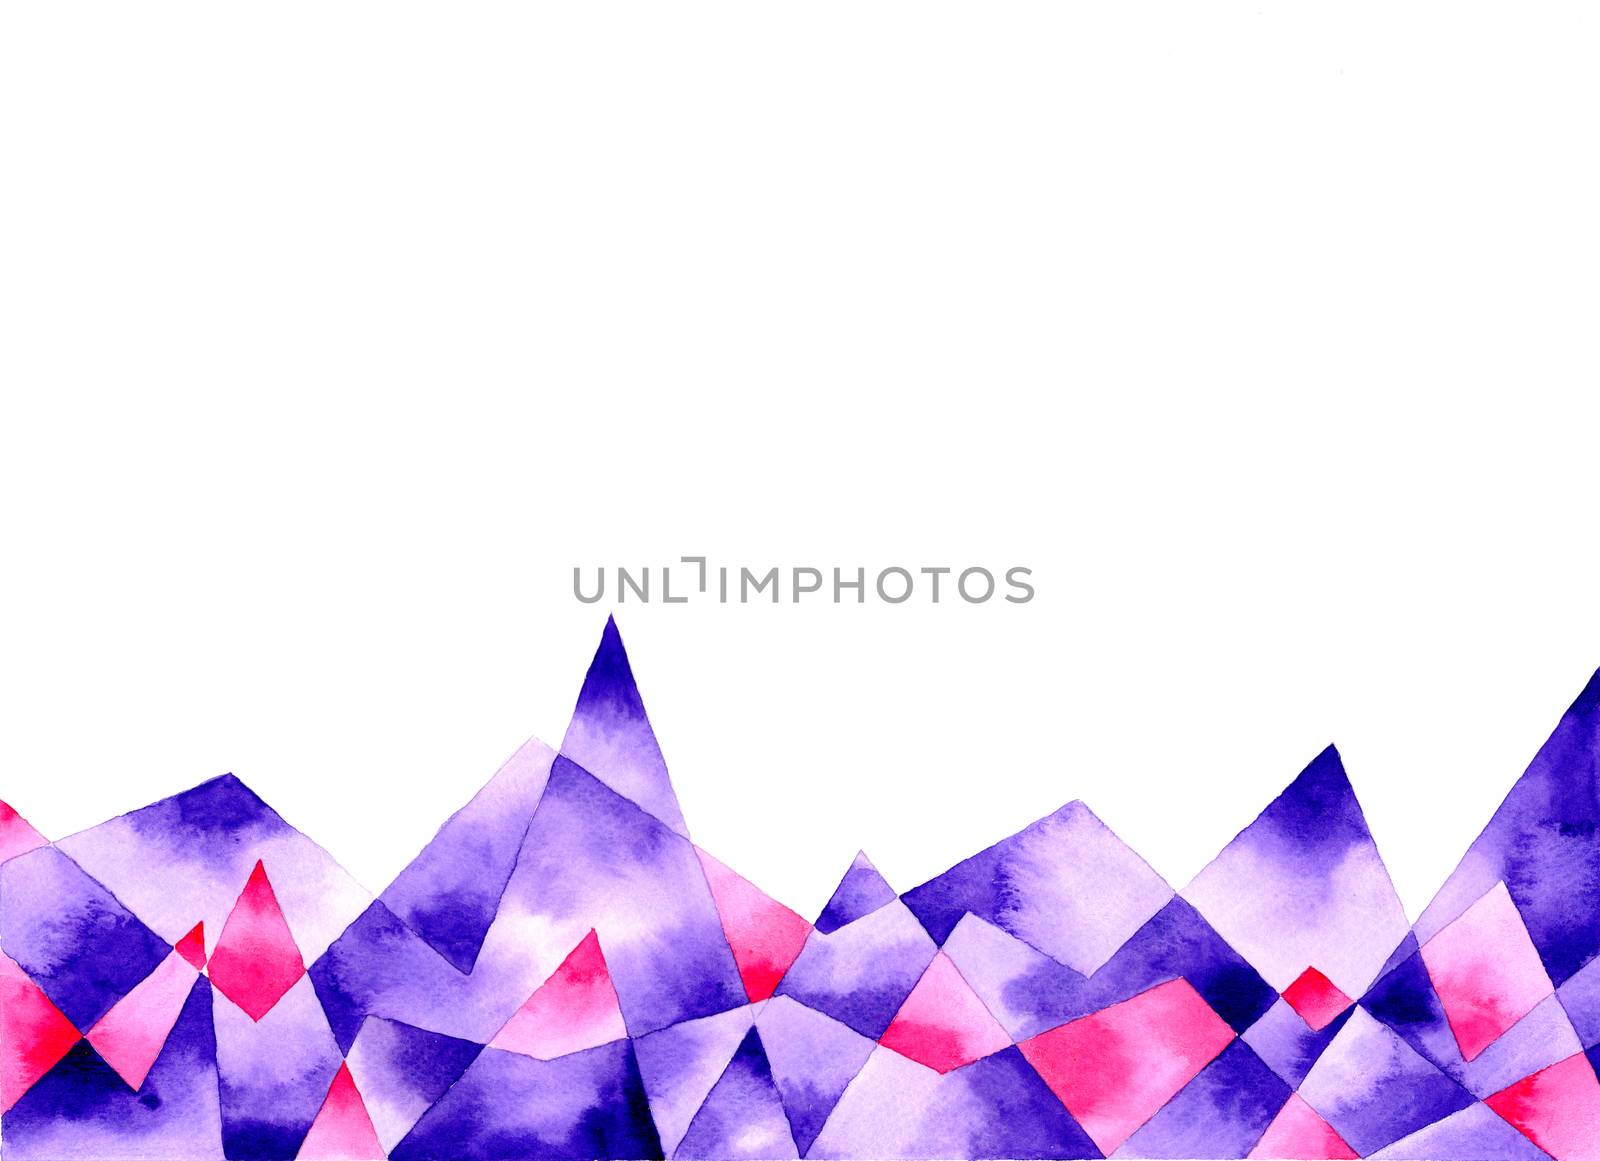 Purple and pink polygon abstract frame on white background. Template for style design. Watercolor hand painting illustration.